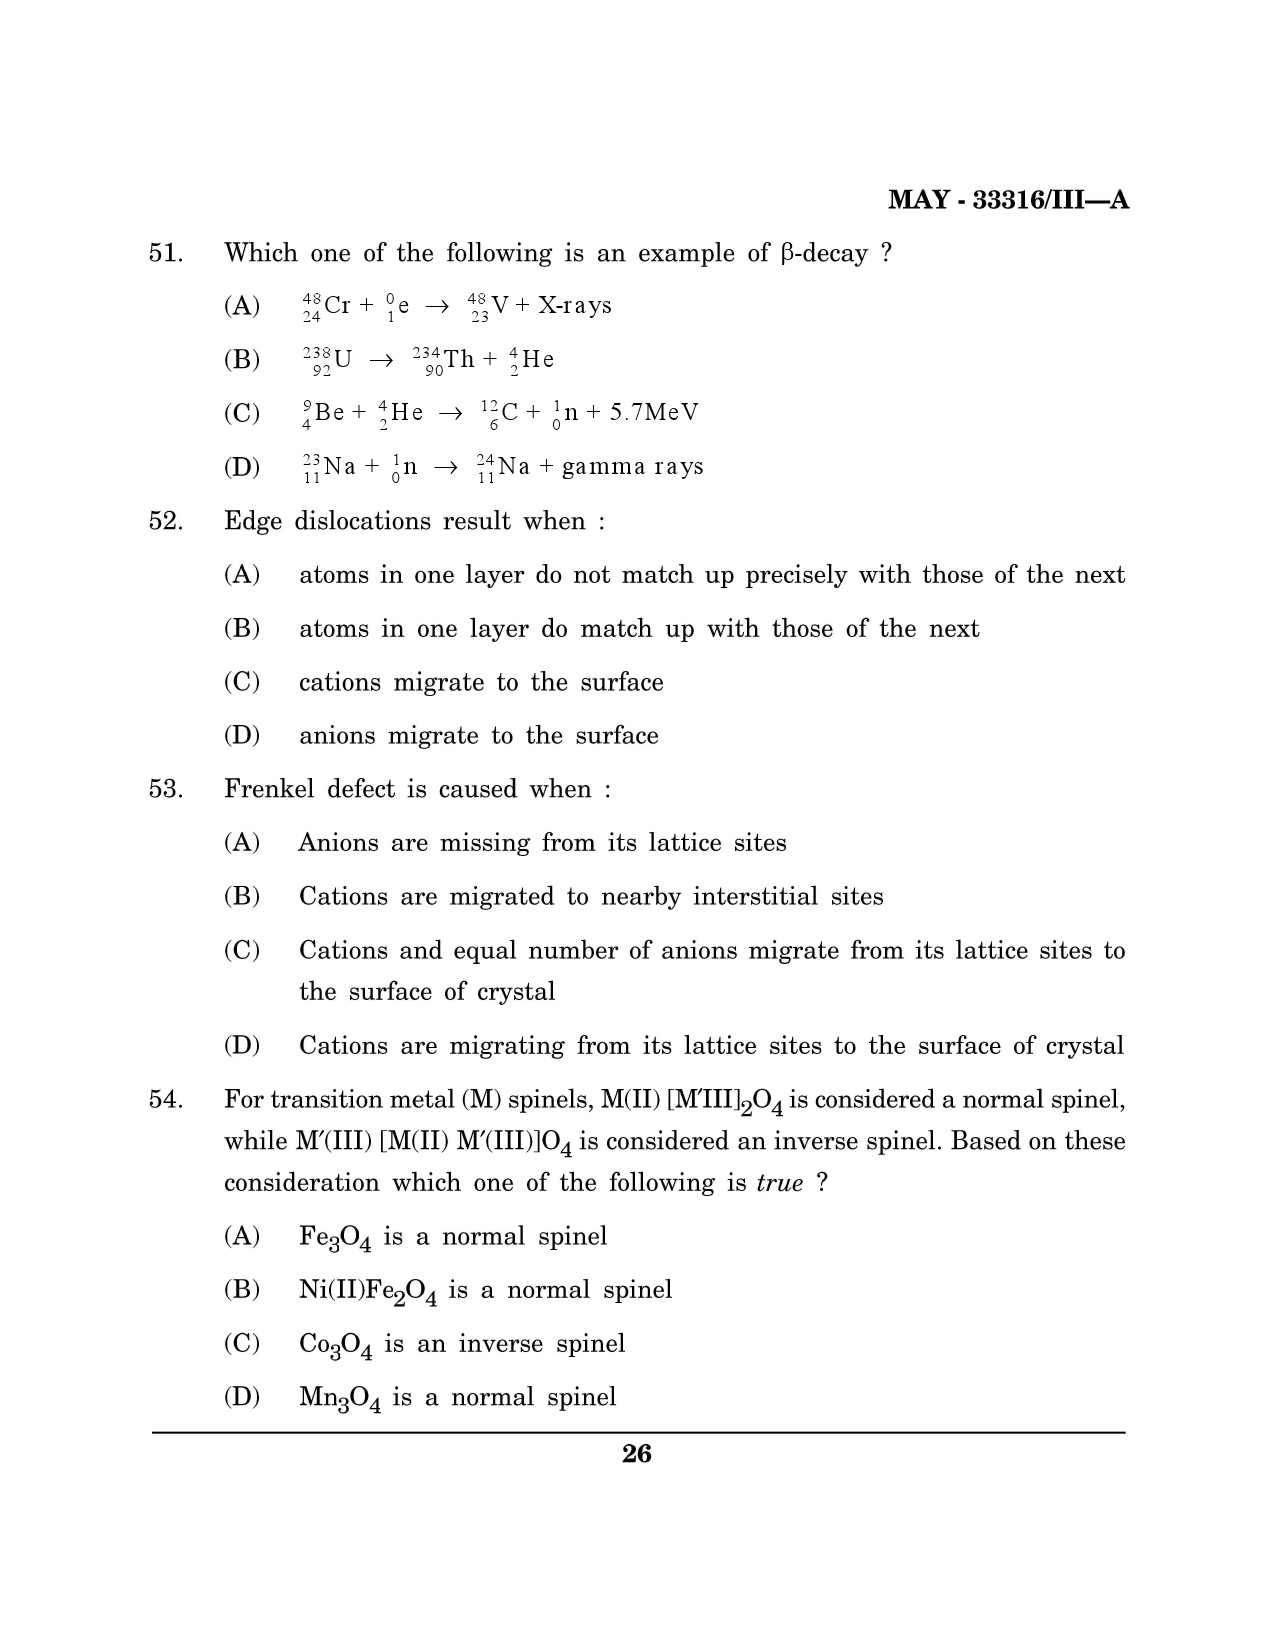 Maharashtra SET Chemical Sciences Question Paper III May 2016 25